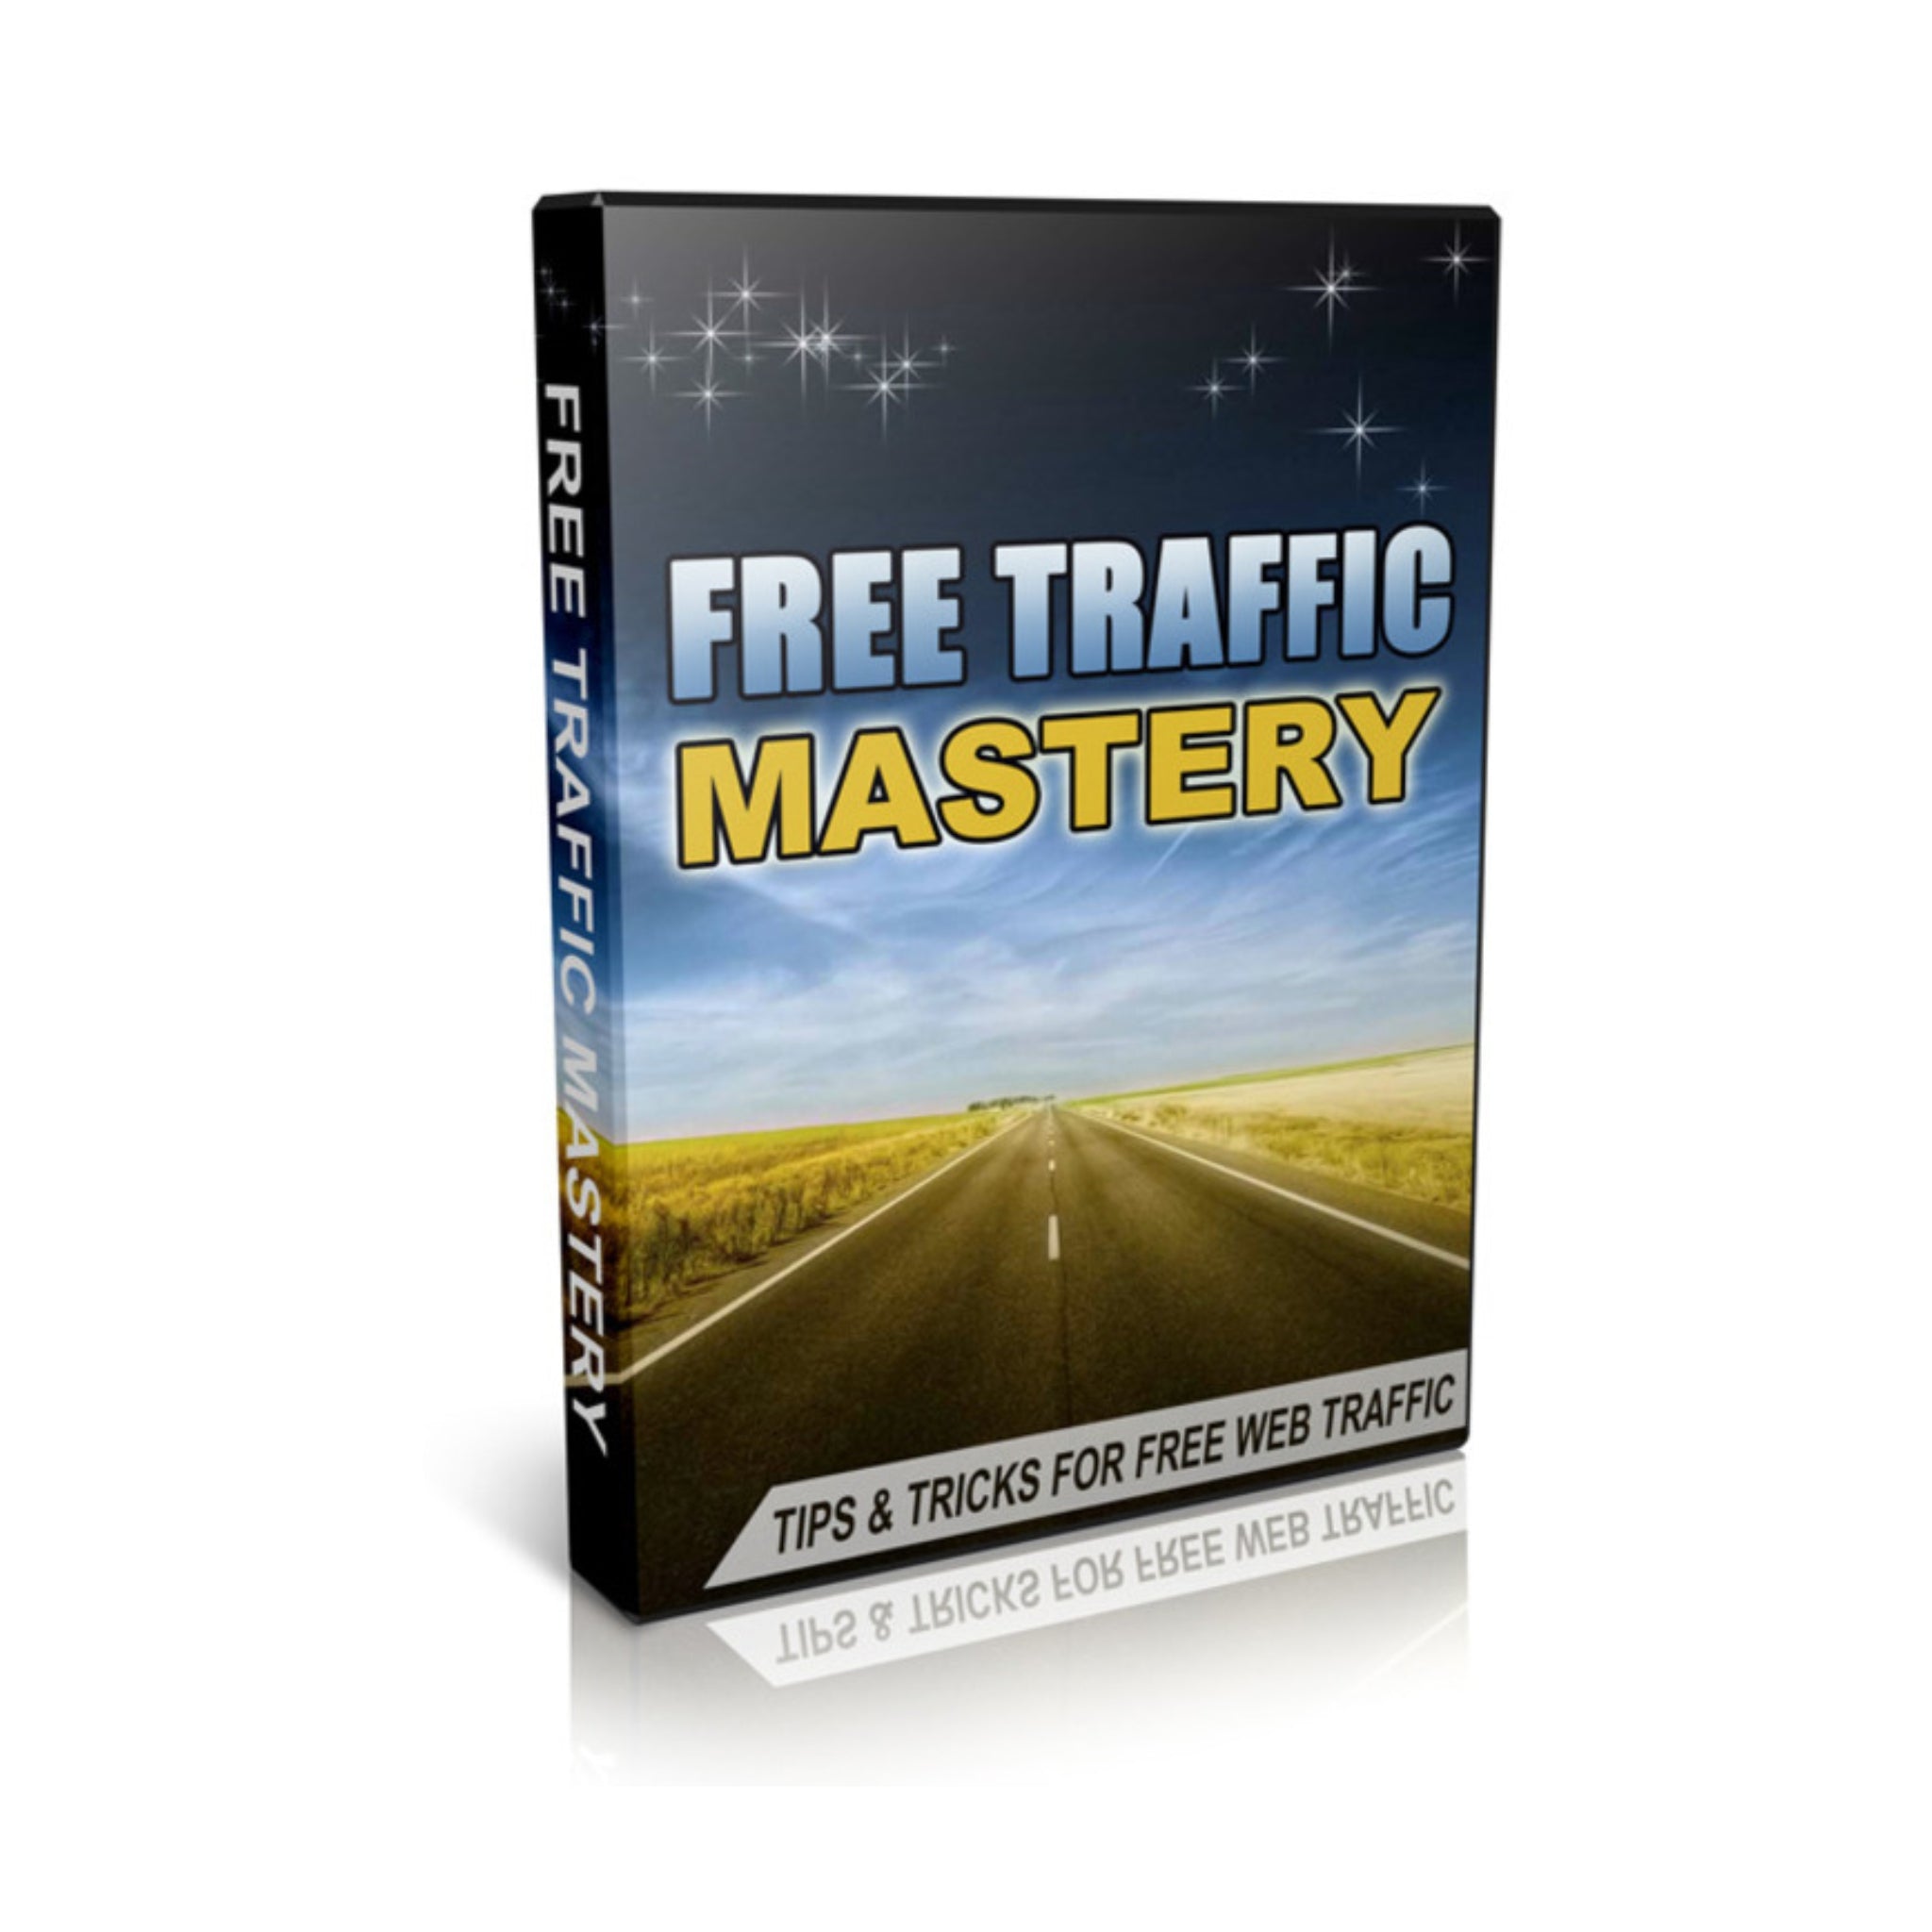 Free Traffic Mastery Video Guide